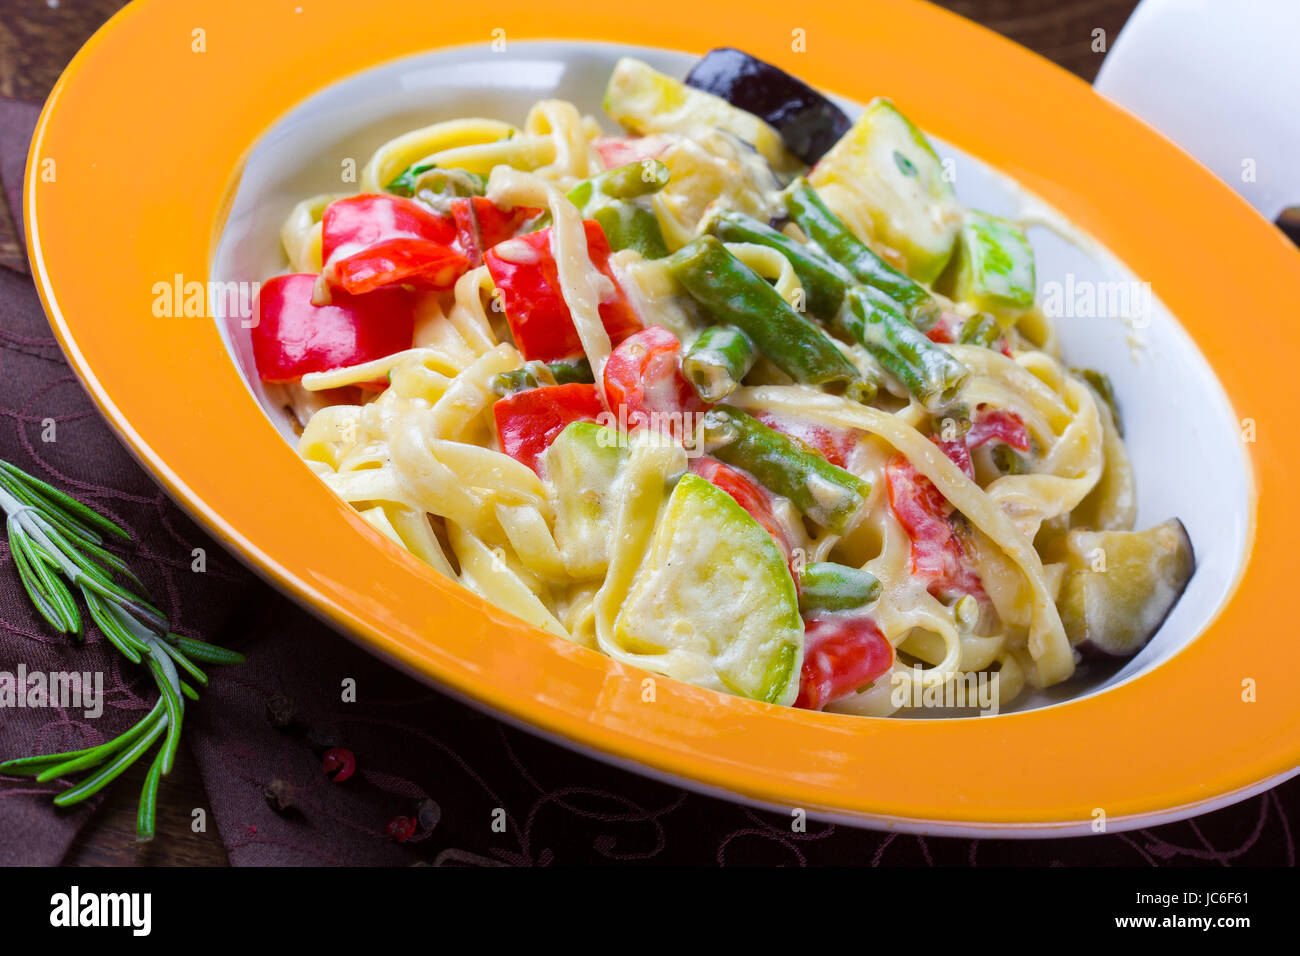 Italian vegetarian pasta with sauce and vegetables, served on a plate Stock Photo